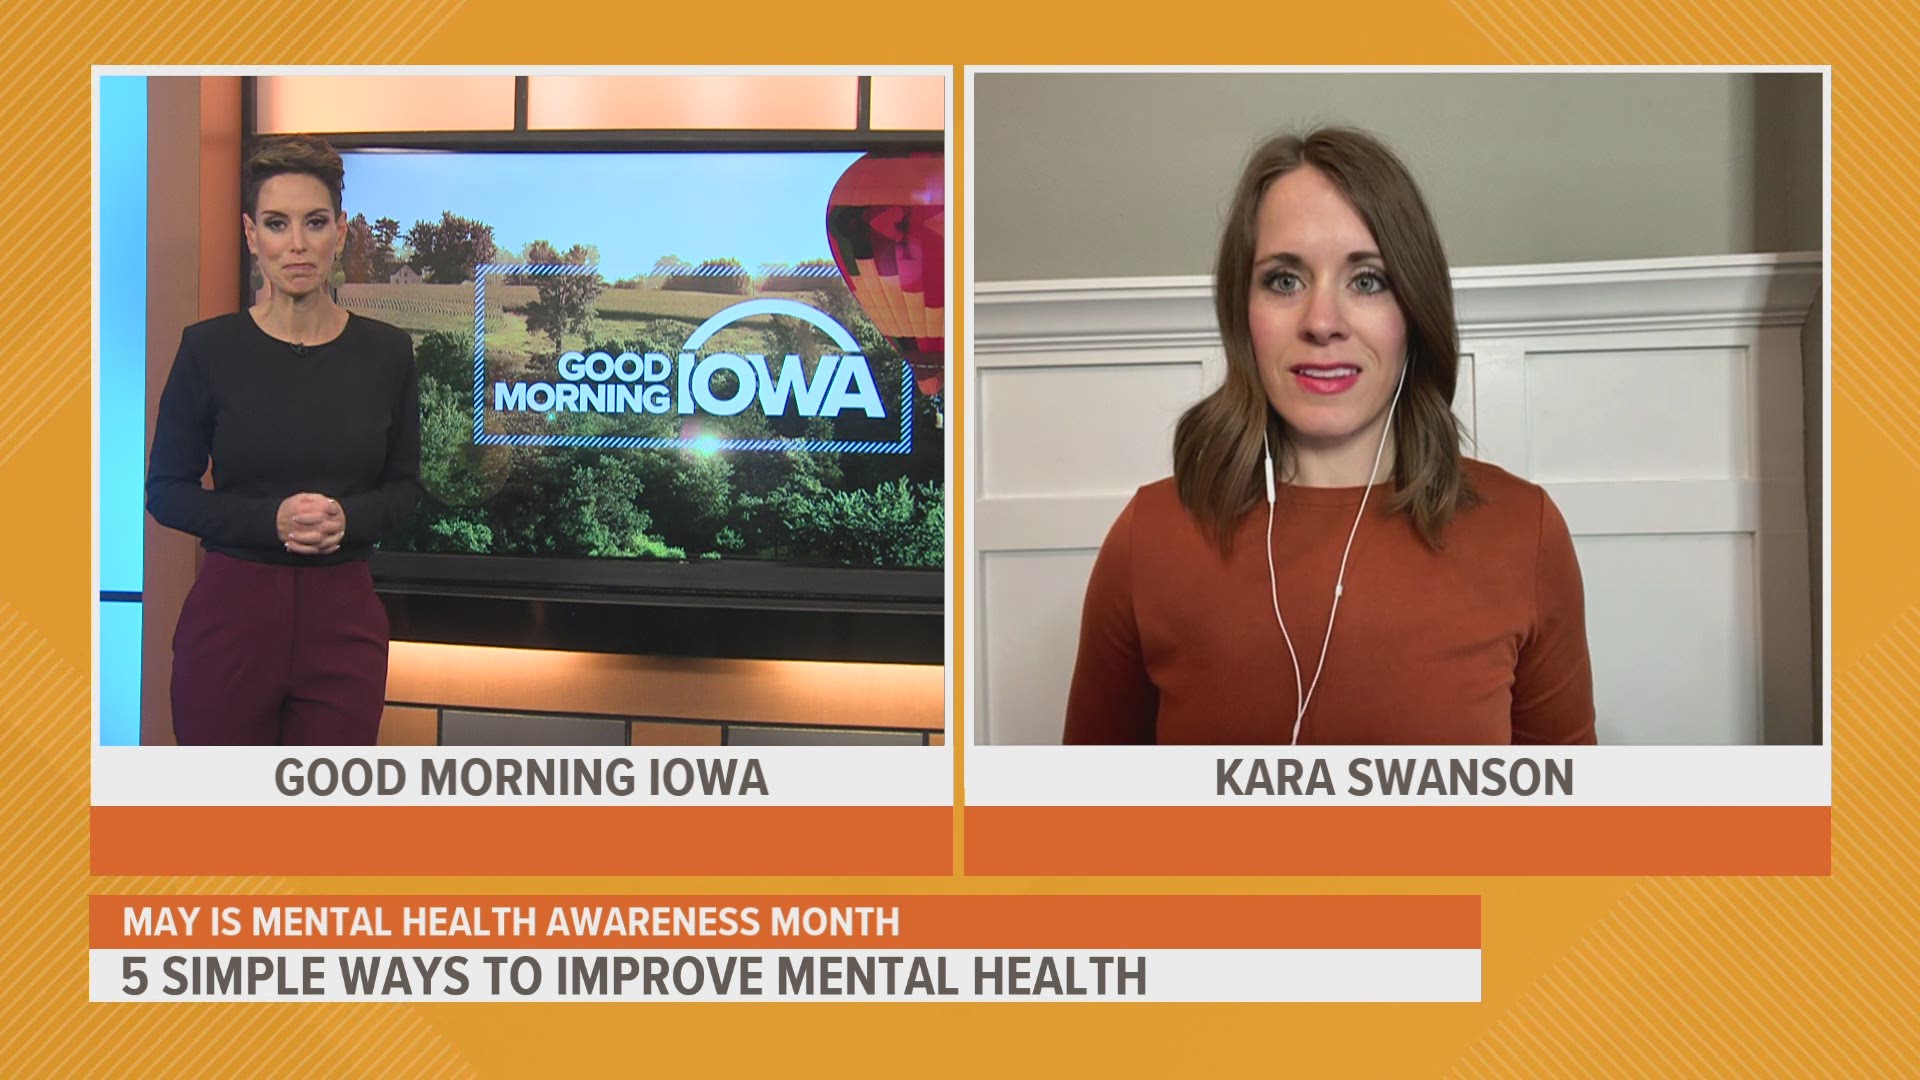 Kara Swanson with Life Well Lived shared 5 simple tips you can implement to improve your mental health this awareness month.